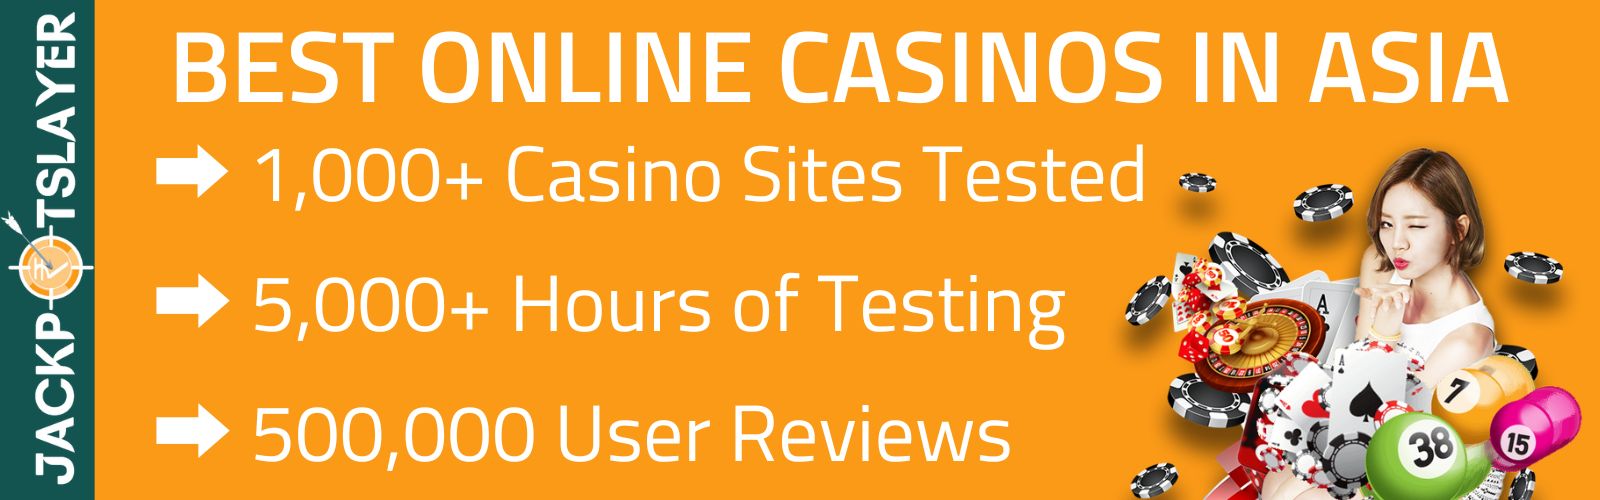 Get Better highest payout online casino Results By Following 3 Simple Steps